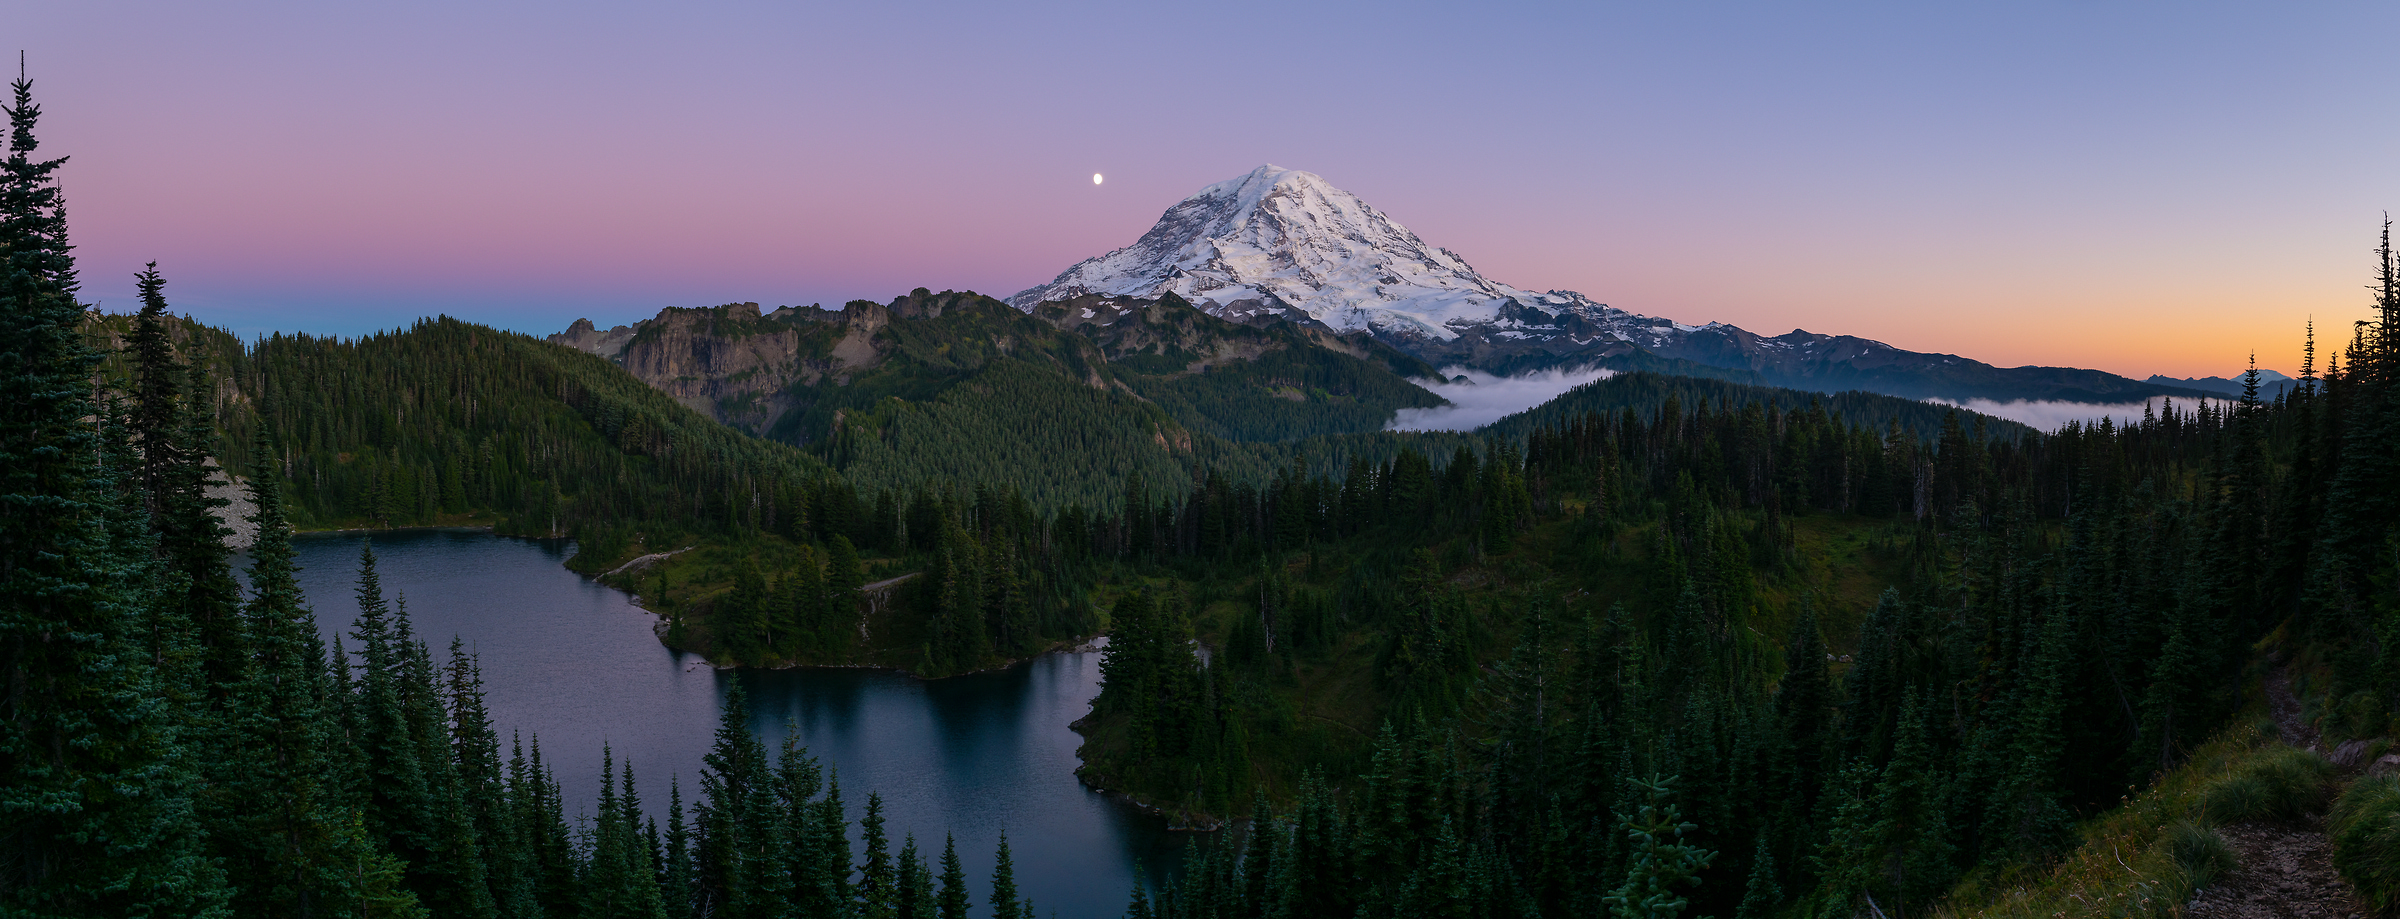 94 megapixels! A very high resolution, large-format VAST photo print of Mt. Rainier at sunset with the moon; landscape photograph created by Greg Probst in Mt. Rainier National Park